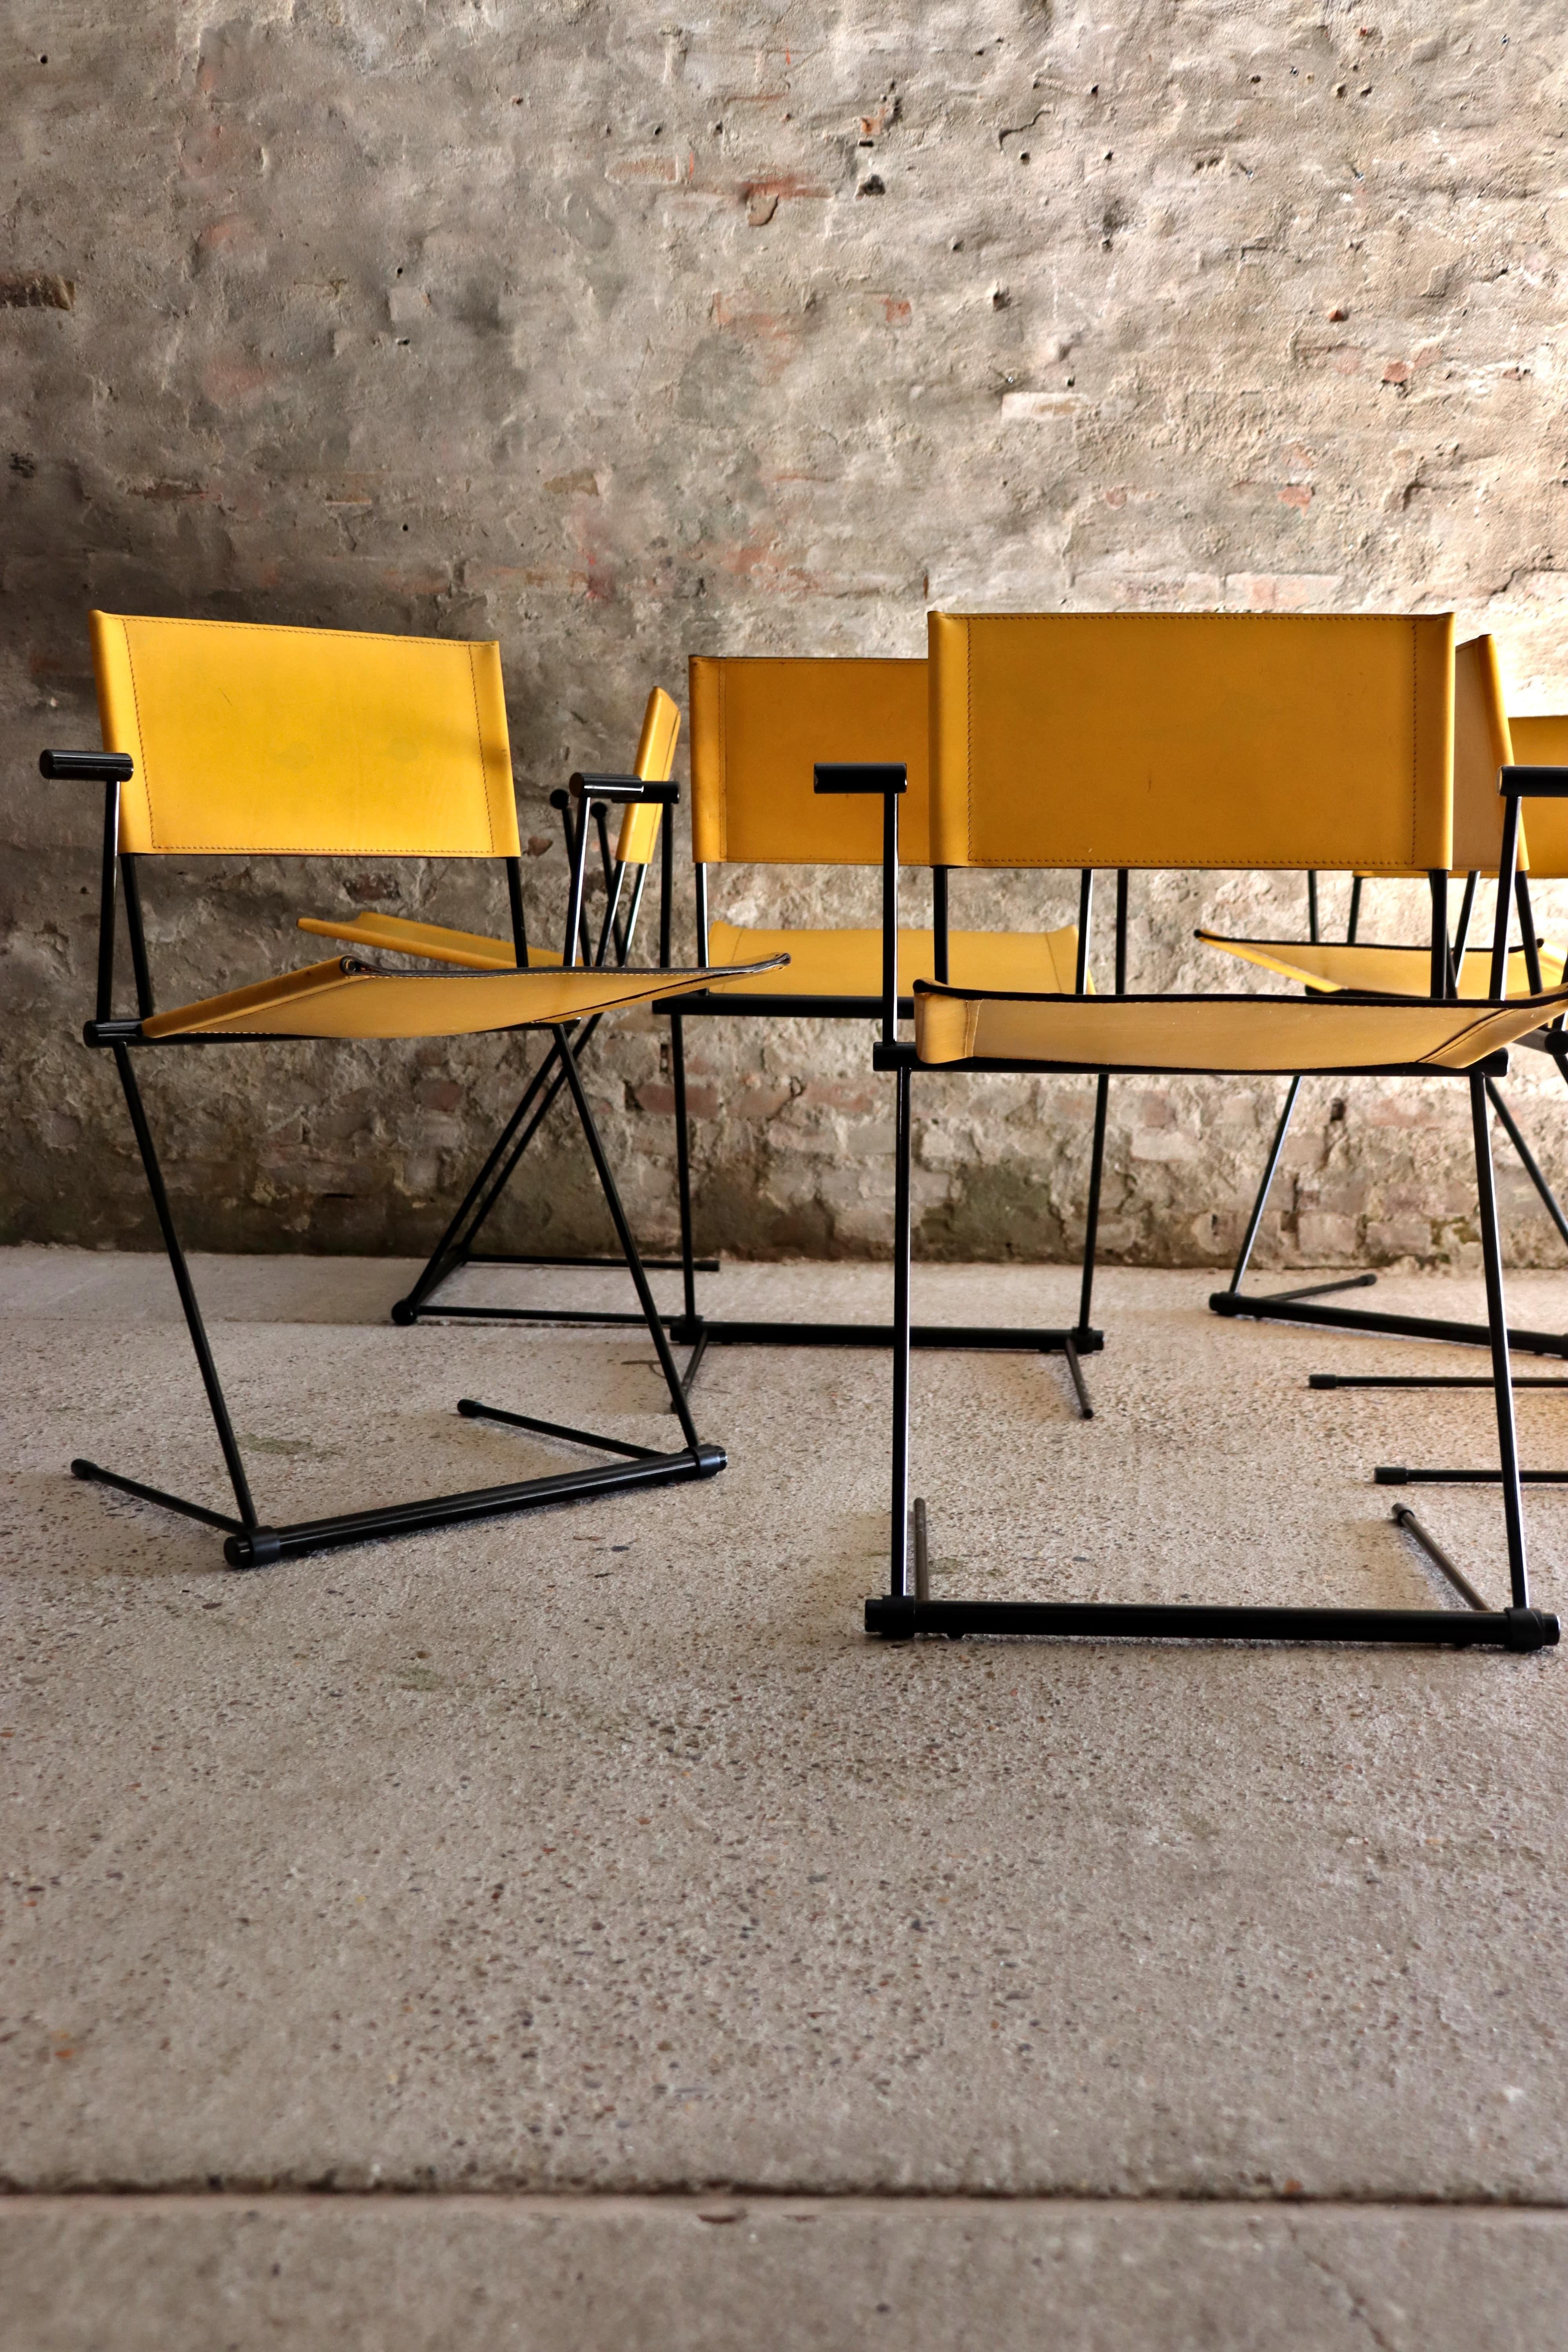 These cool chairs are called Ballerina and were designed by Herbert Ohl and manufactured by Matteo Grassi in Italy. The cantilever chairs are made of black lacquered spring steel. The seat and backrest are made of solid yellow leather. Great